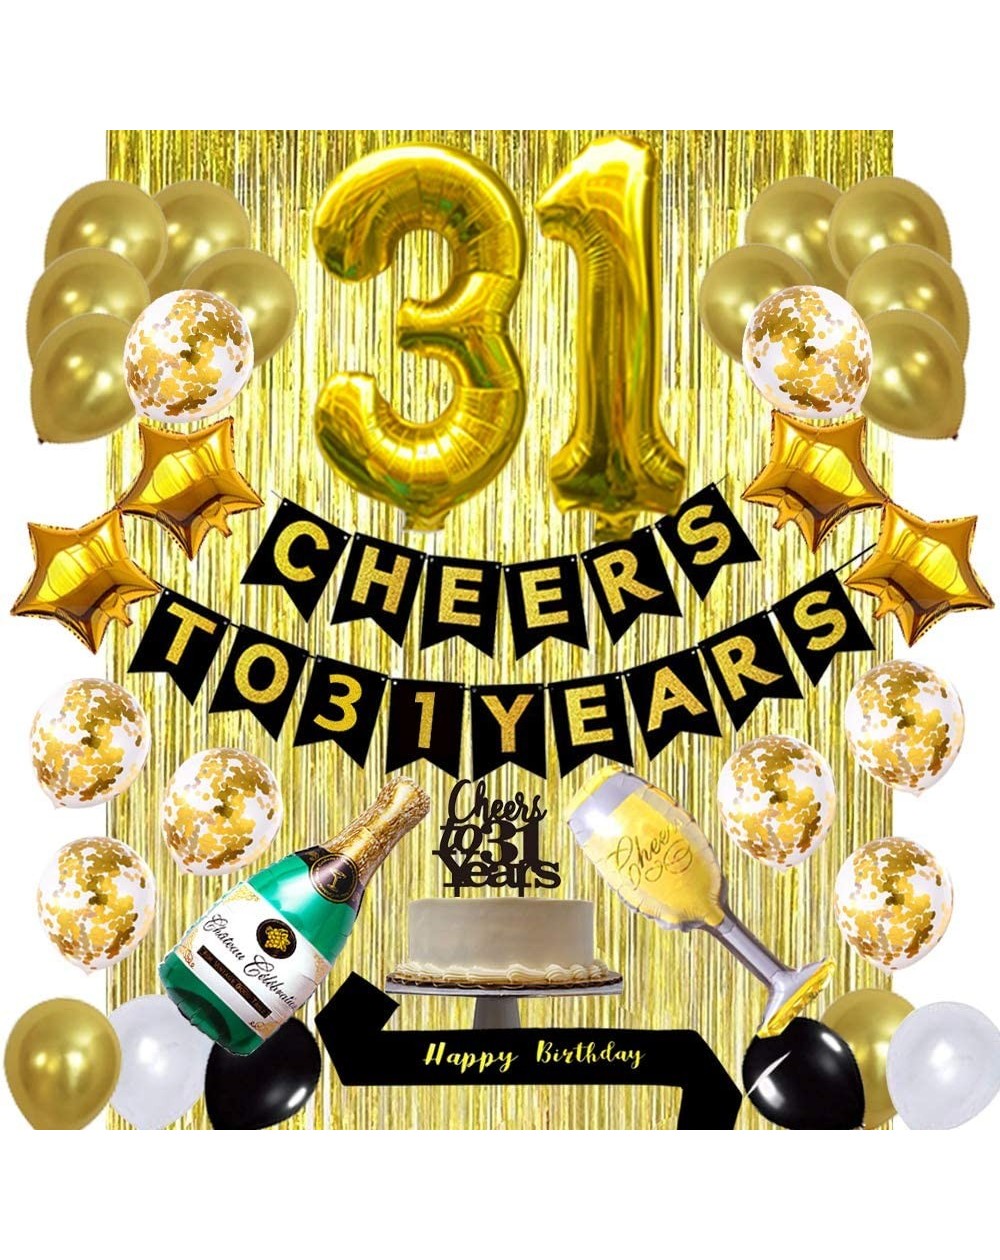 Balloons Gold 31st Birthday Decorations kit- Cheers to 31 Years Banner Balloons-31st Cake Topper Birthday Sash- Gold Tinsel F...